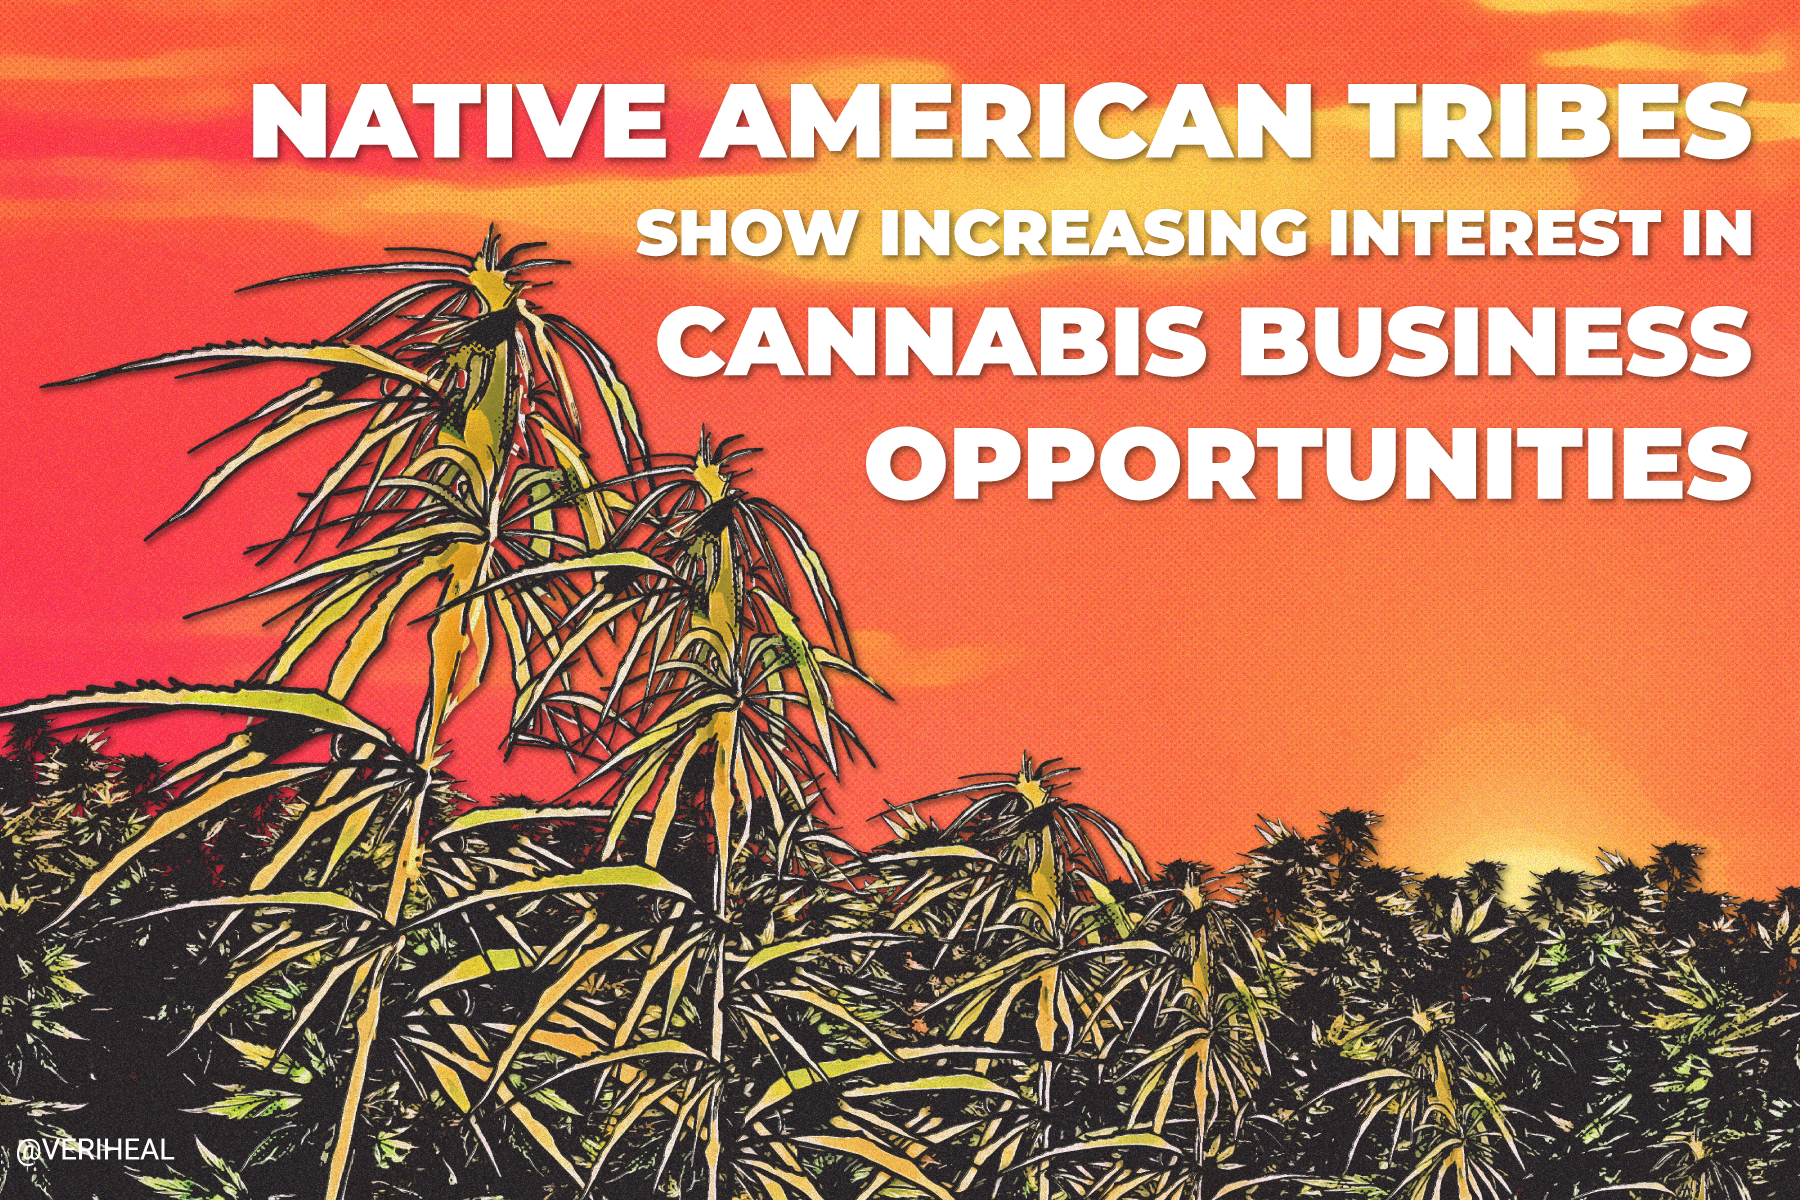 Native American Tribes Show Increasing Interest in Cannabis Business Opportunities